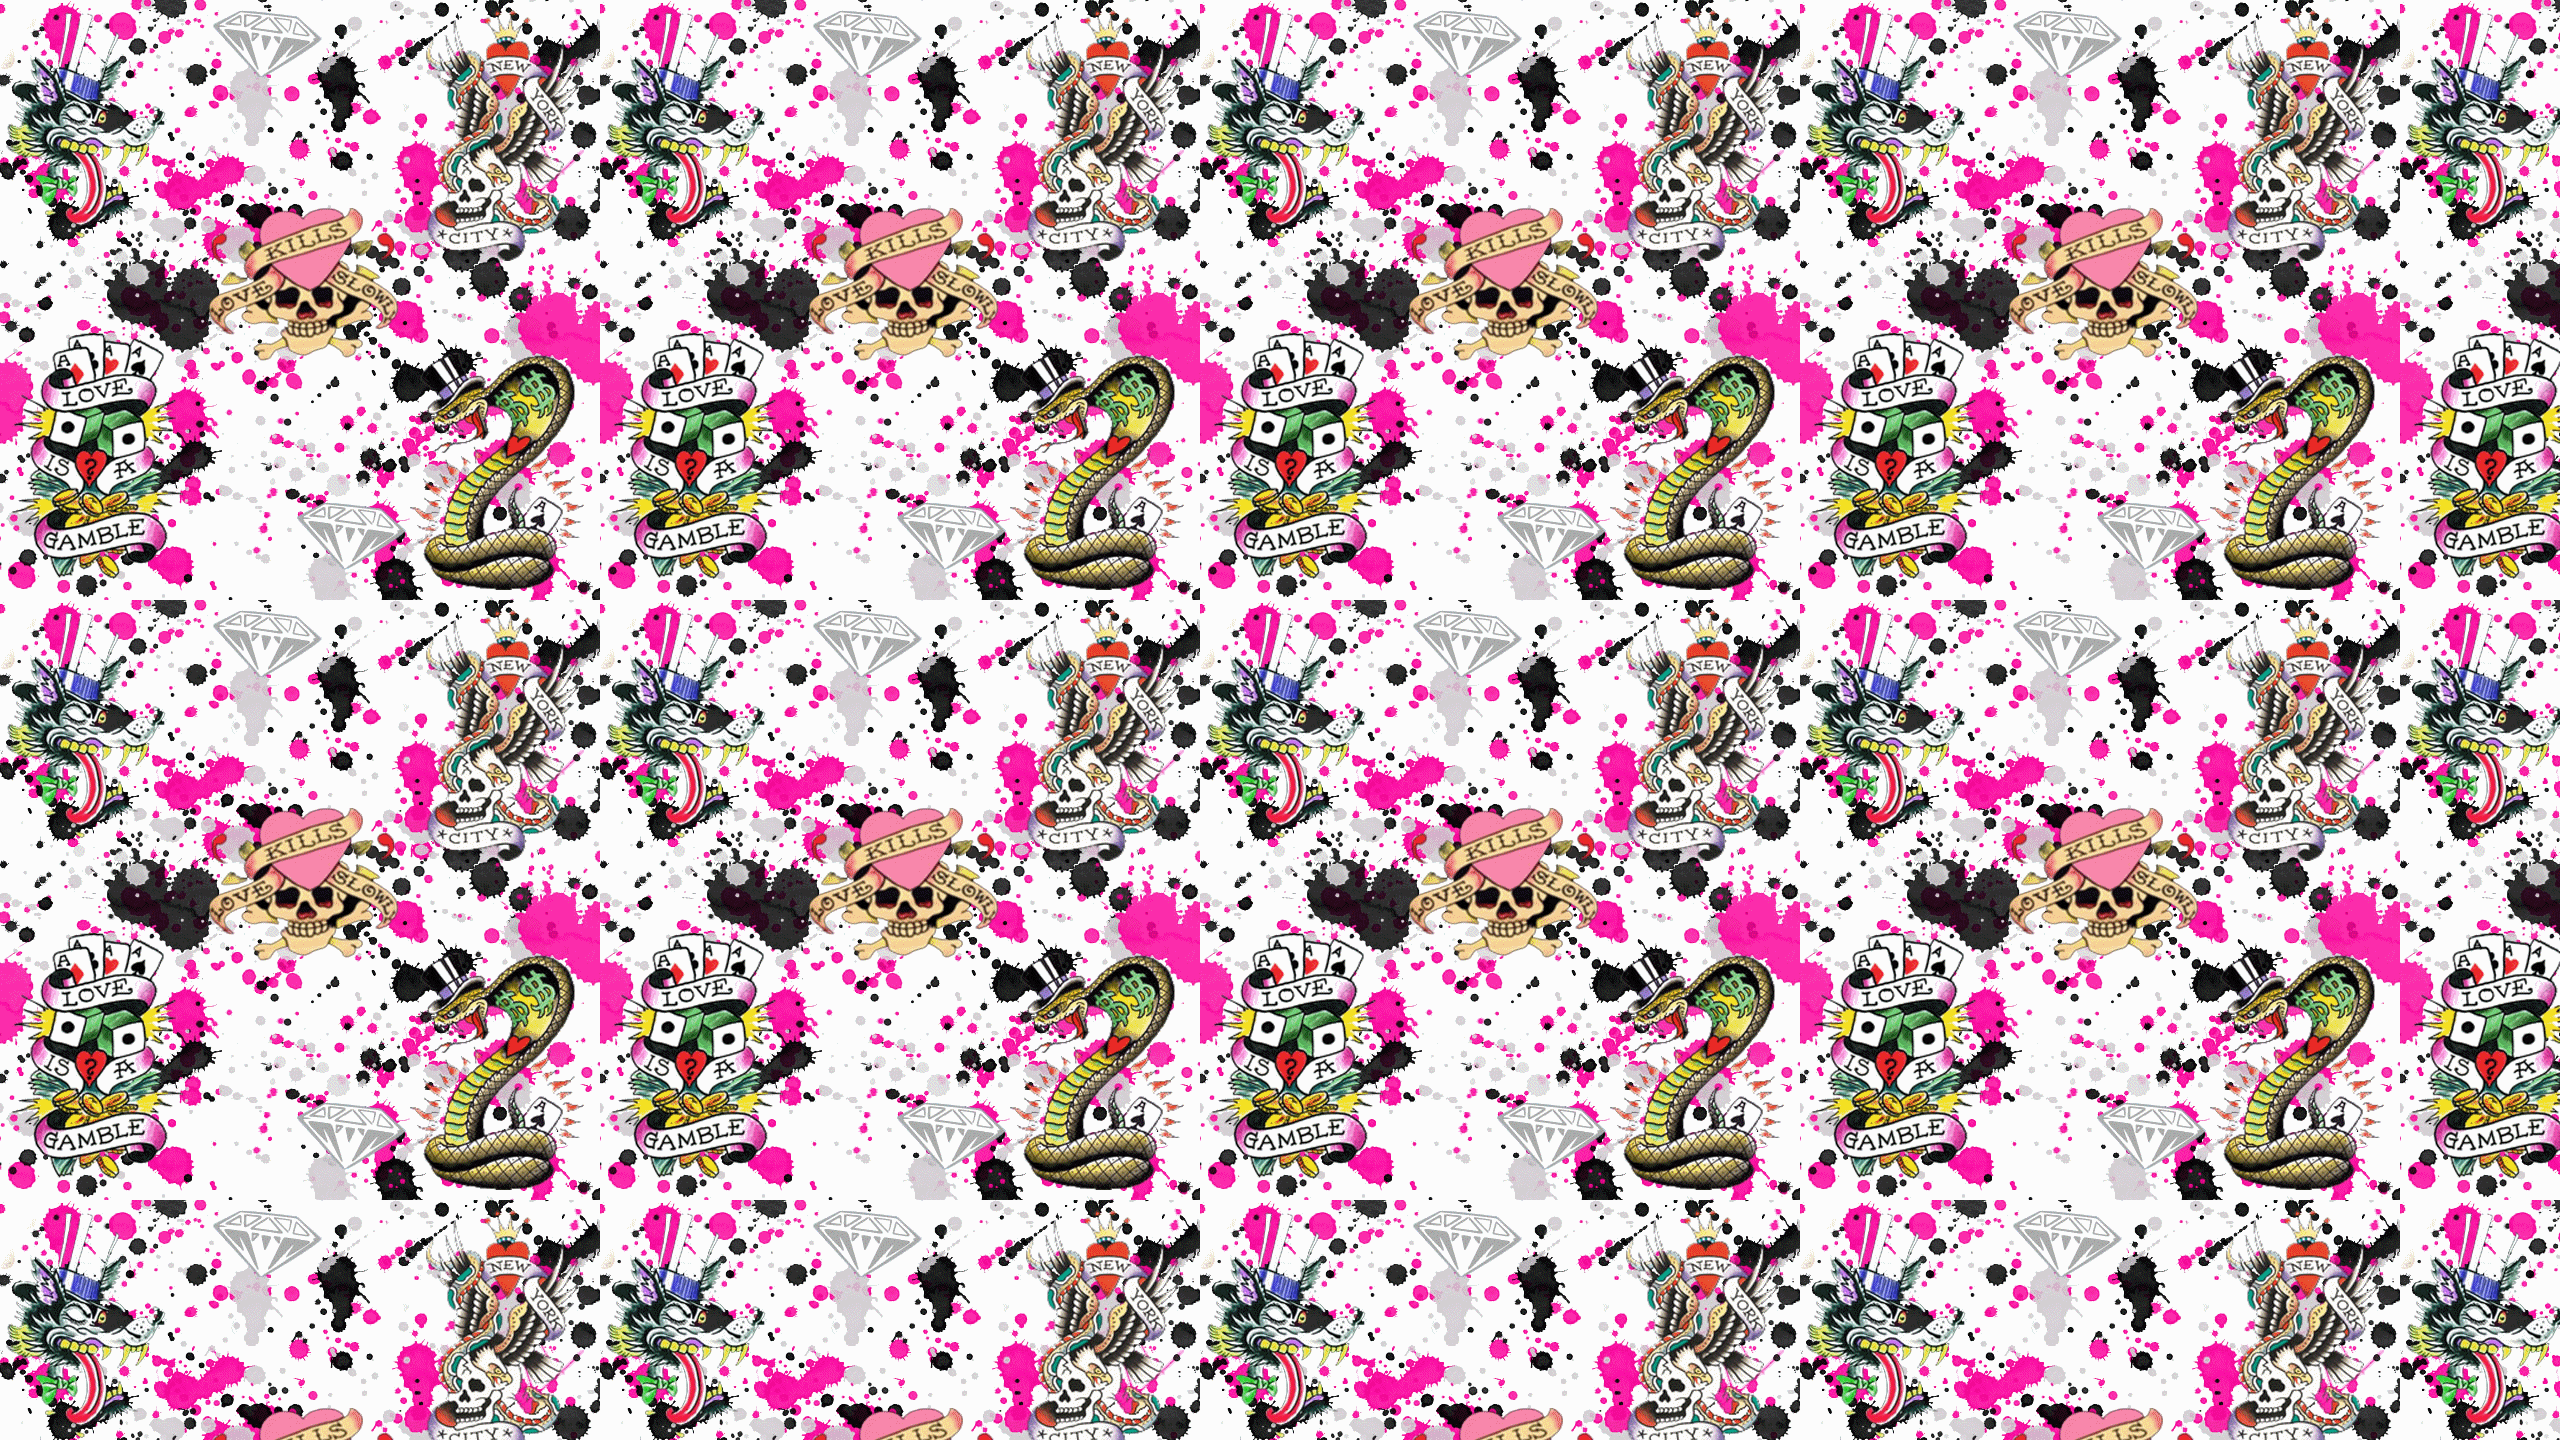 Ed Hardy Flasher Desktop Wallpaper Is Easy Just Save The